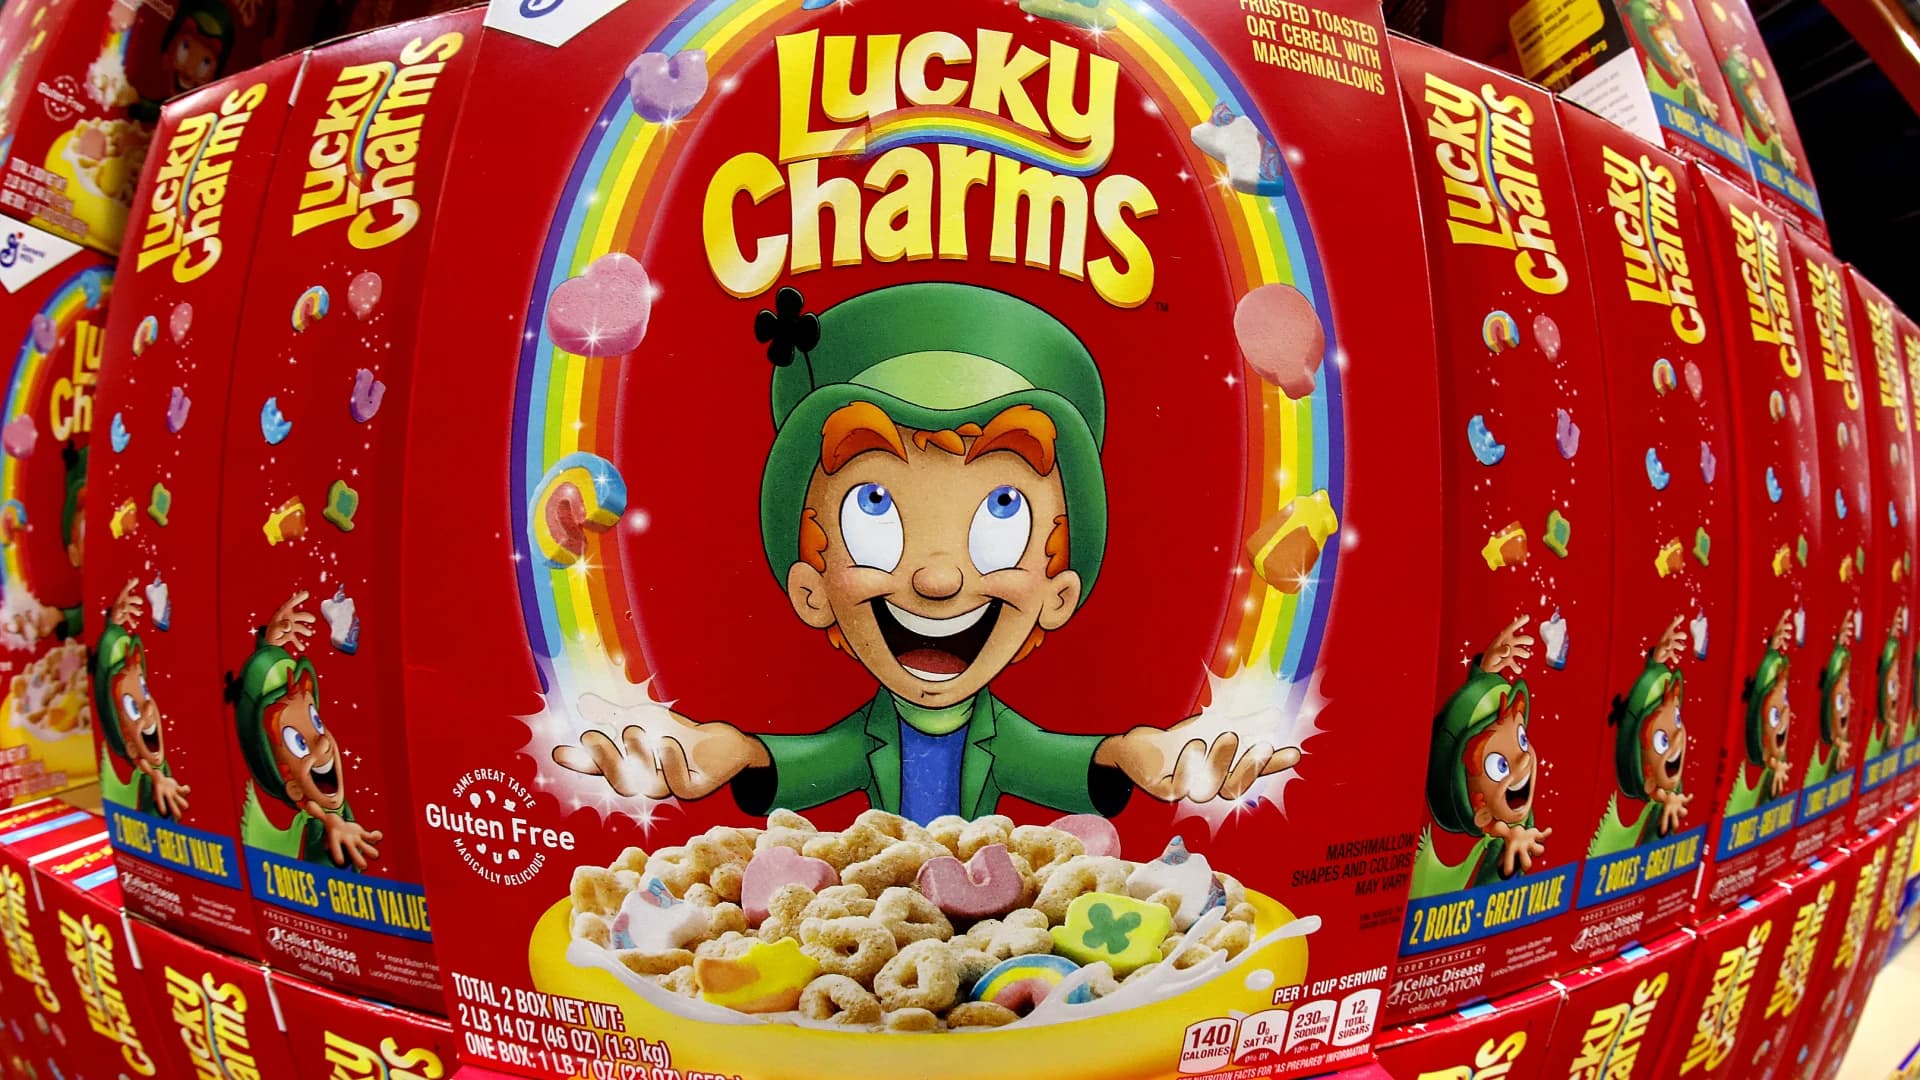 FDA investigating Lucky Charms after reports of illness